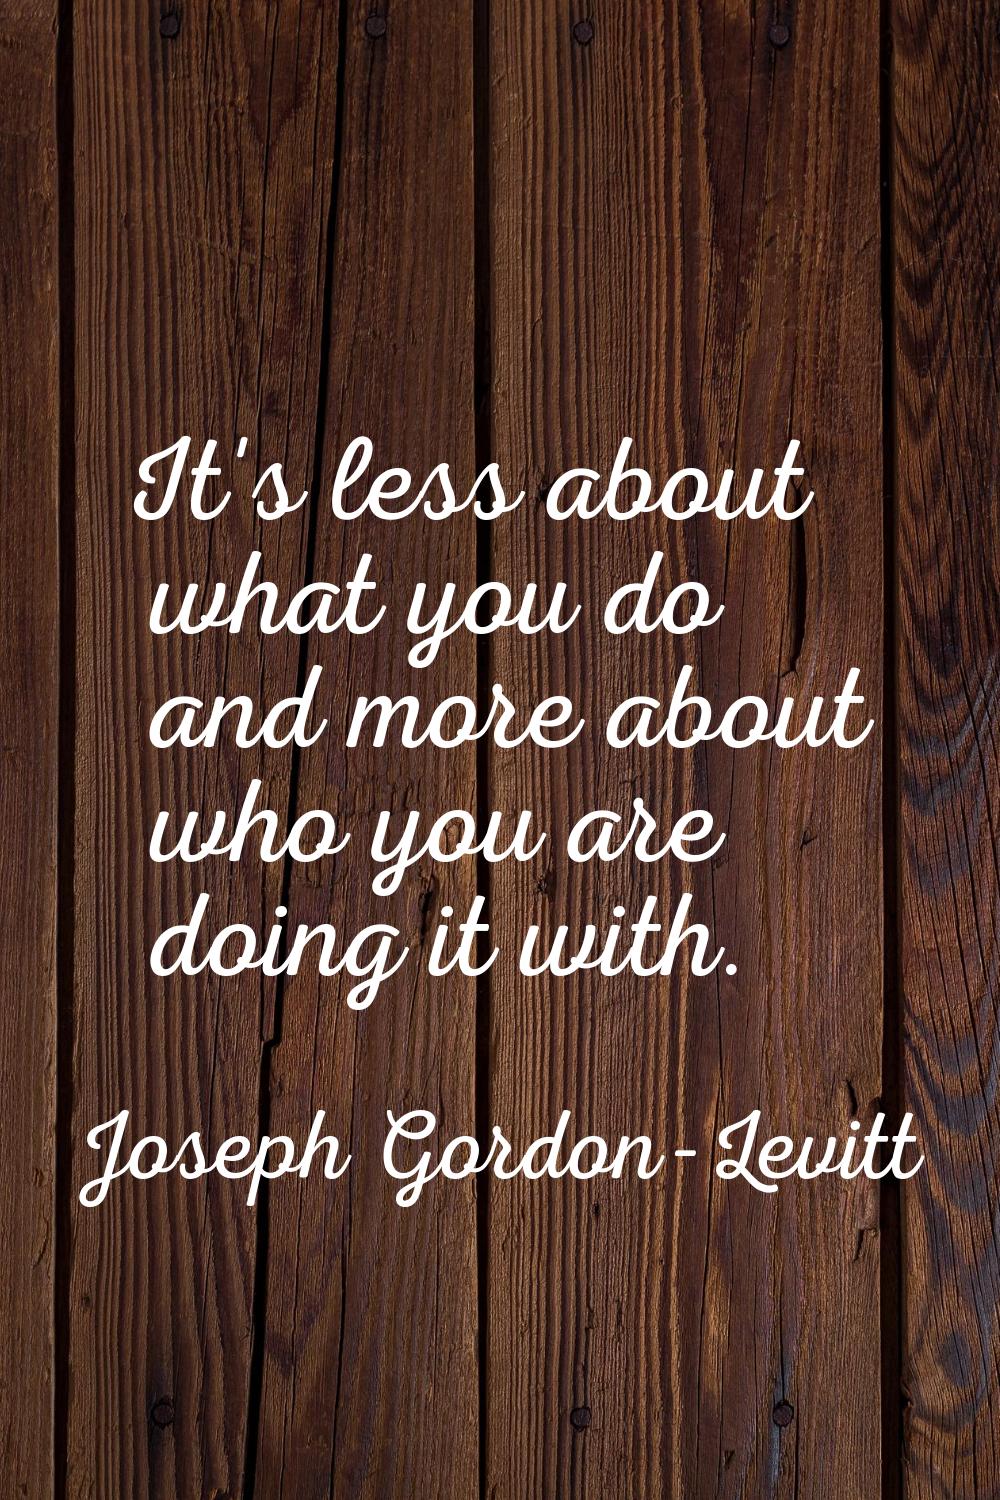 It's less about what you do and more about who you are doing it with.